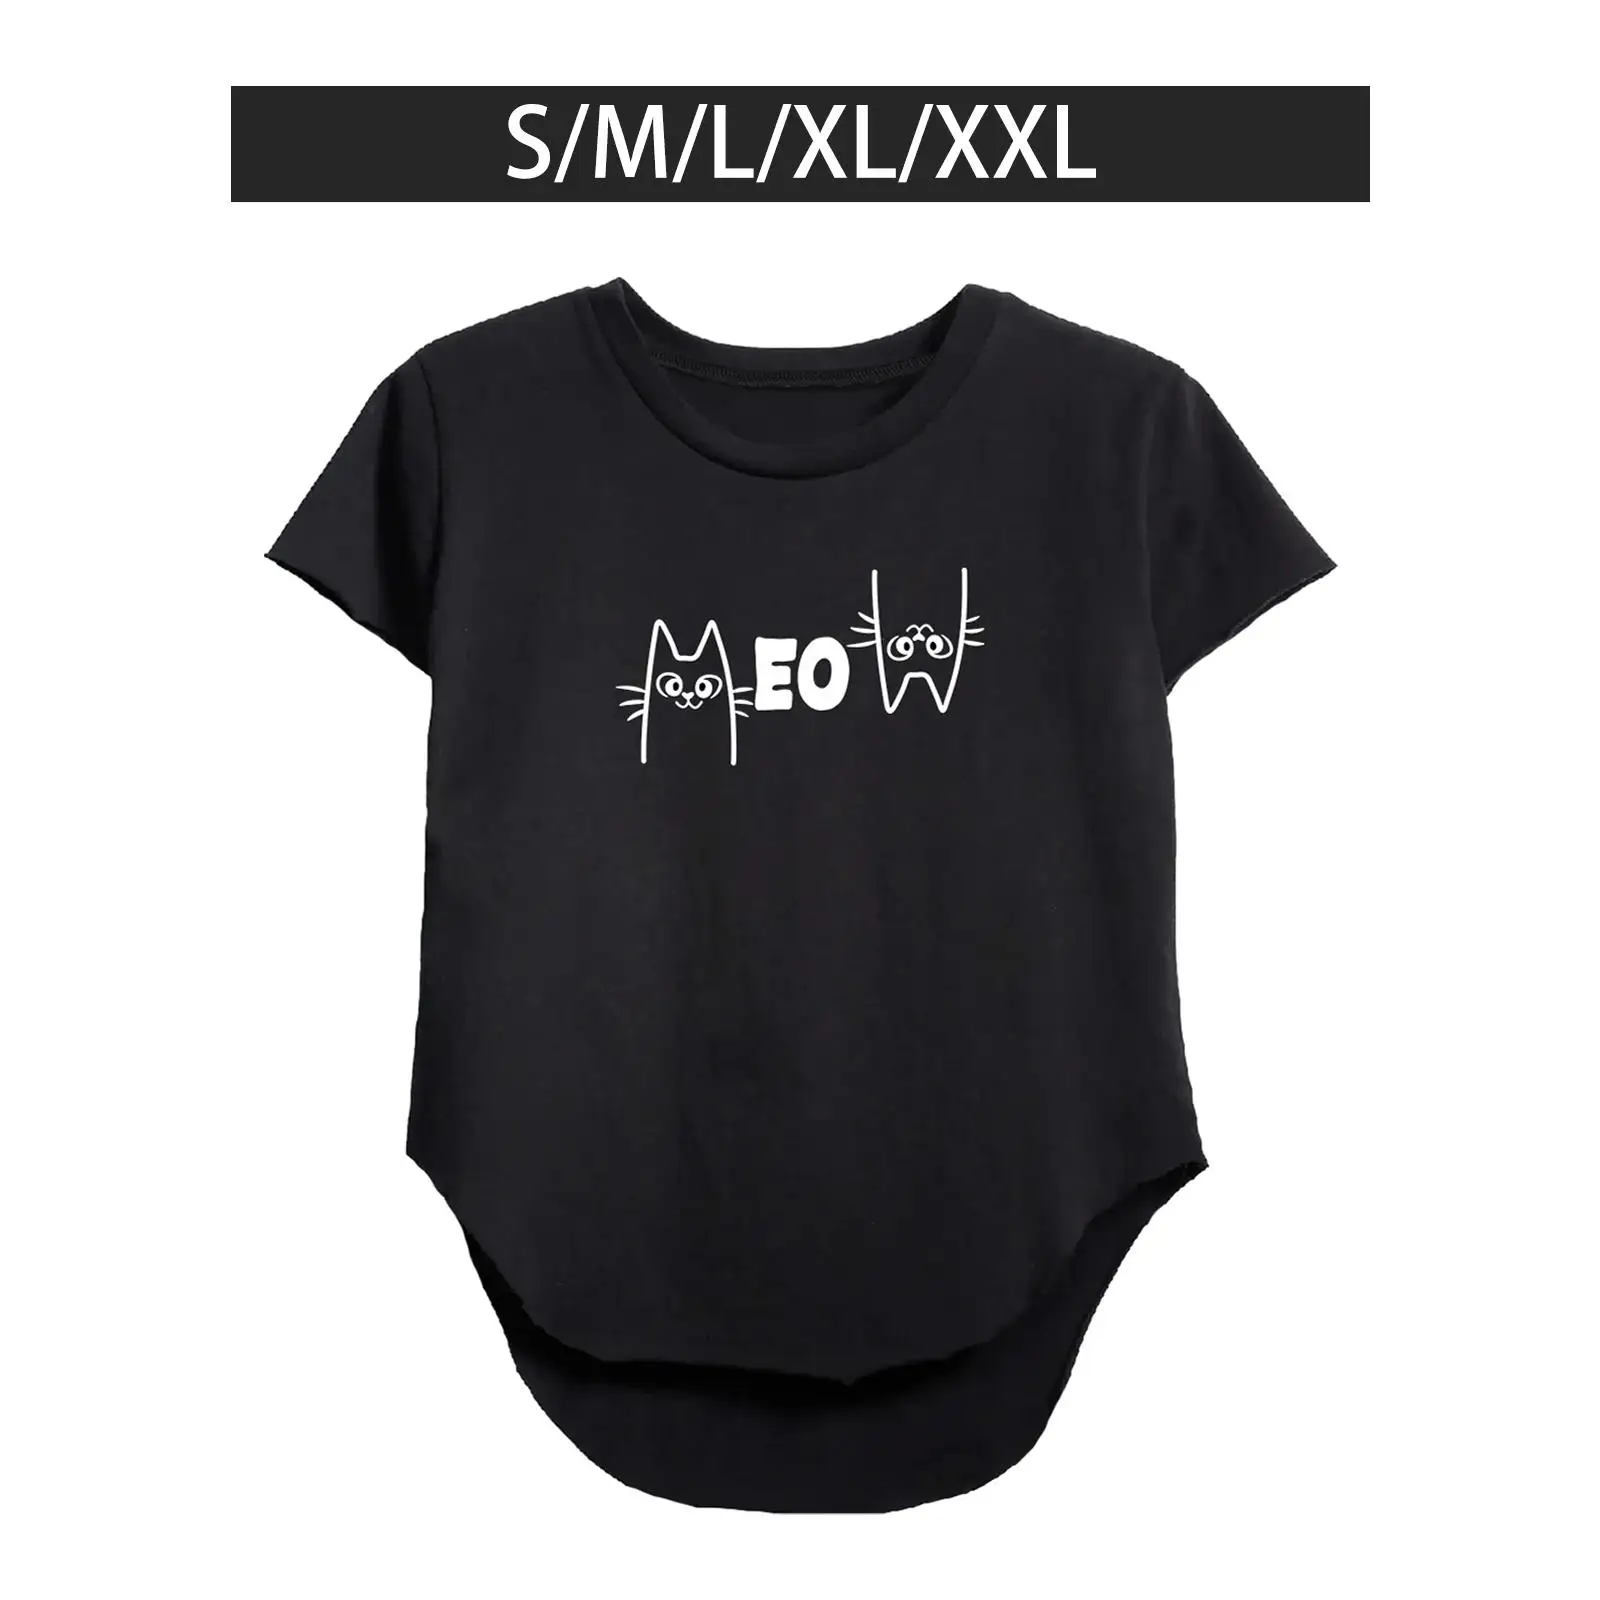 Women Short Sleeve T Shirt Summer Tops Crewneck Gift Black Clothing Tunic Tops Basic Tee for Vacation Commuting Sports Travel